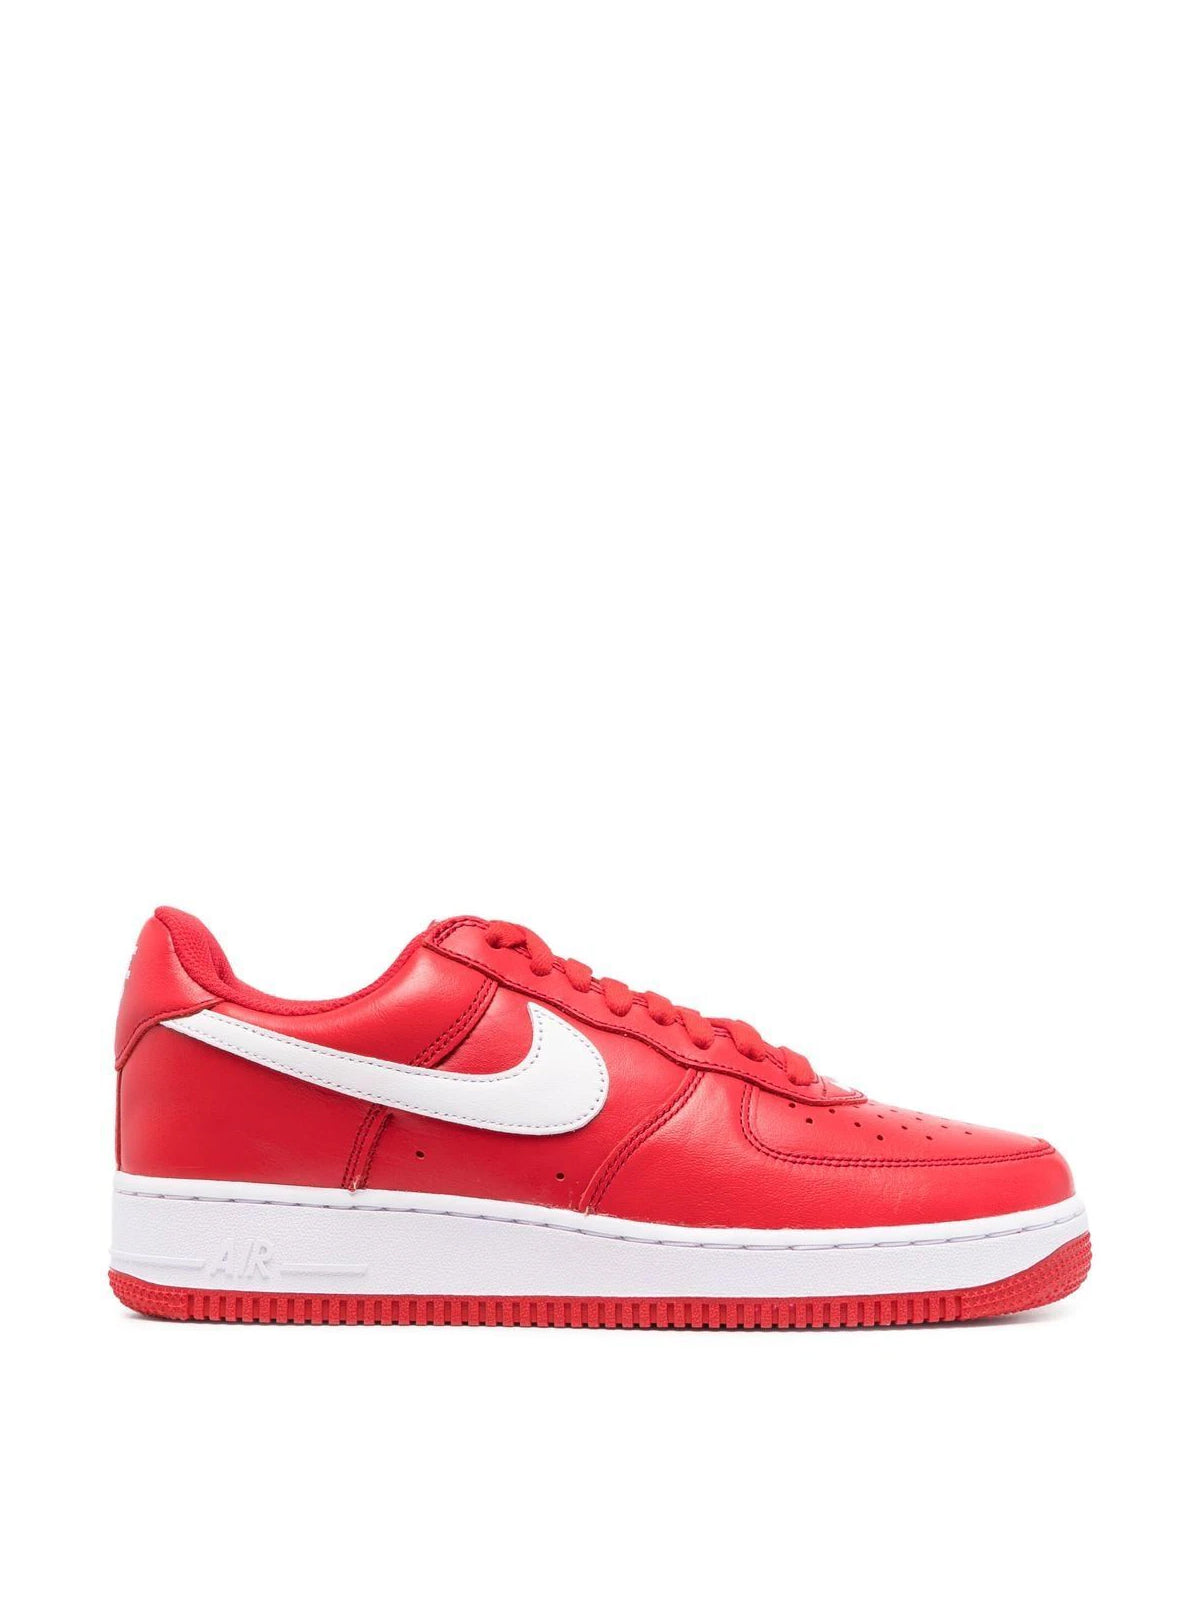 Air Force 1 Low Retro QS Sneakers